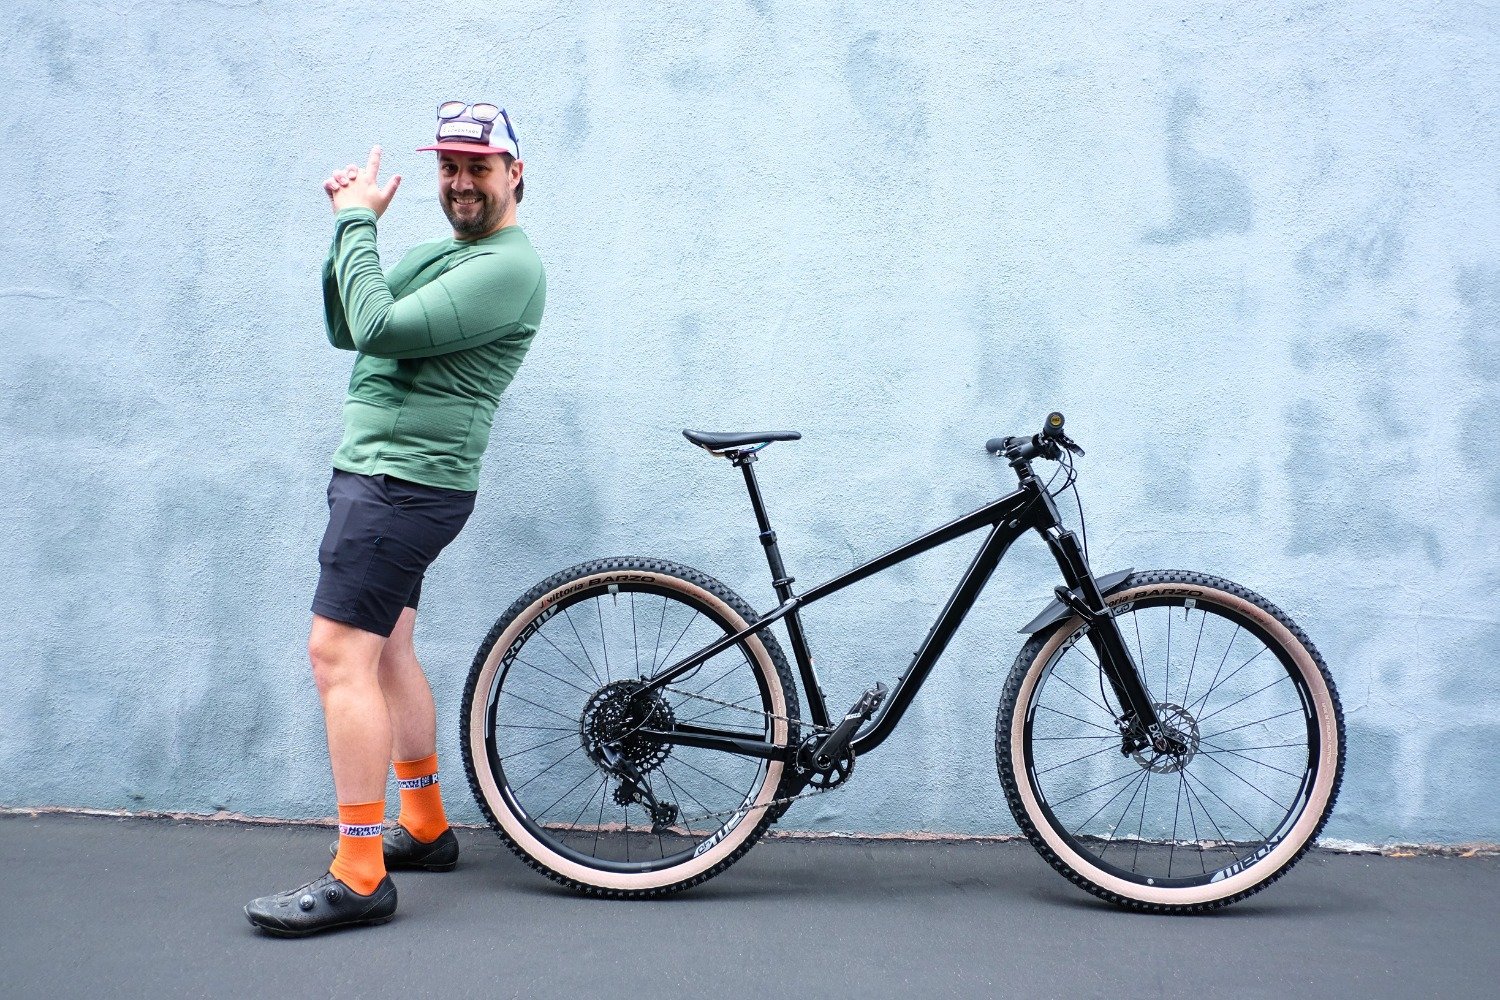 Mr. Dan just got himself a new new hard tail @salsacycles Timberjake.

Super Elegant in all black with a little pop of his oil slick rails and tan sidewalls. If you get a chance ask him to lift it because its pretty light. Probably light then your bi